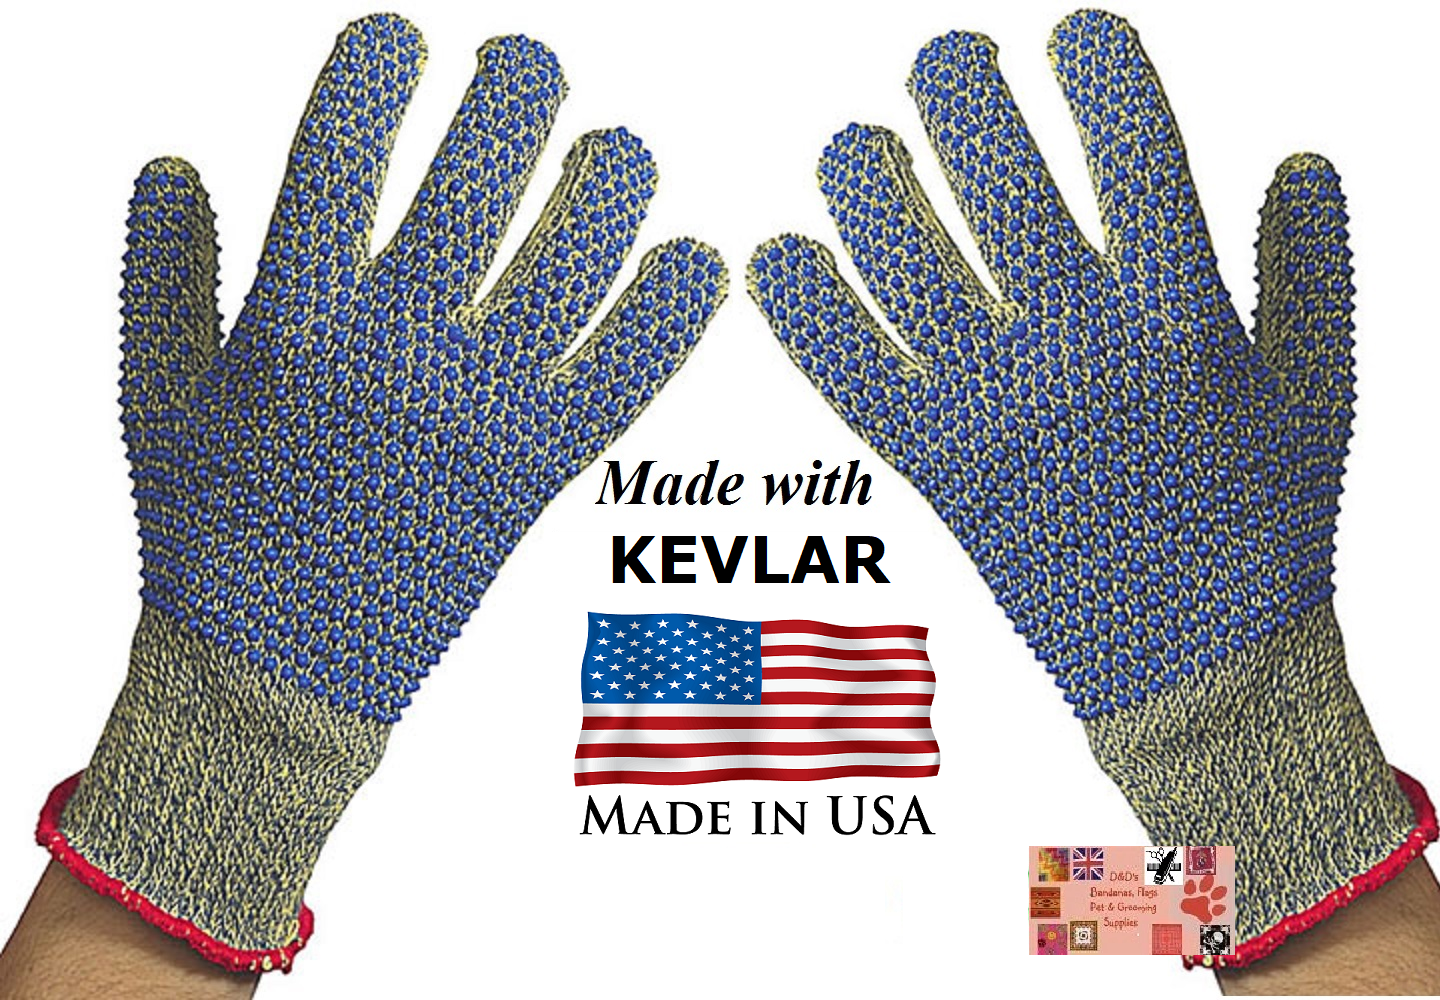 Ansell Armor Knit - Armor knit animal handling gloves with kevlar*dog,cat,bird,reptile*pet grooming